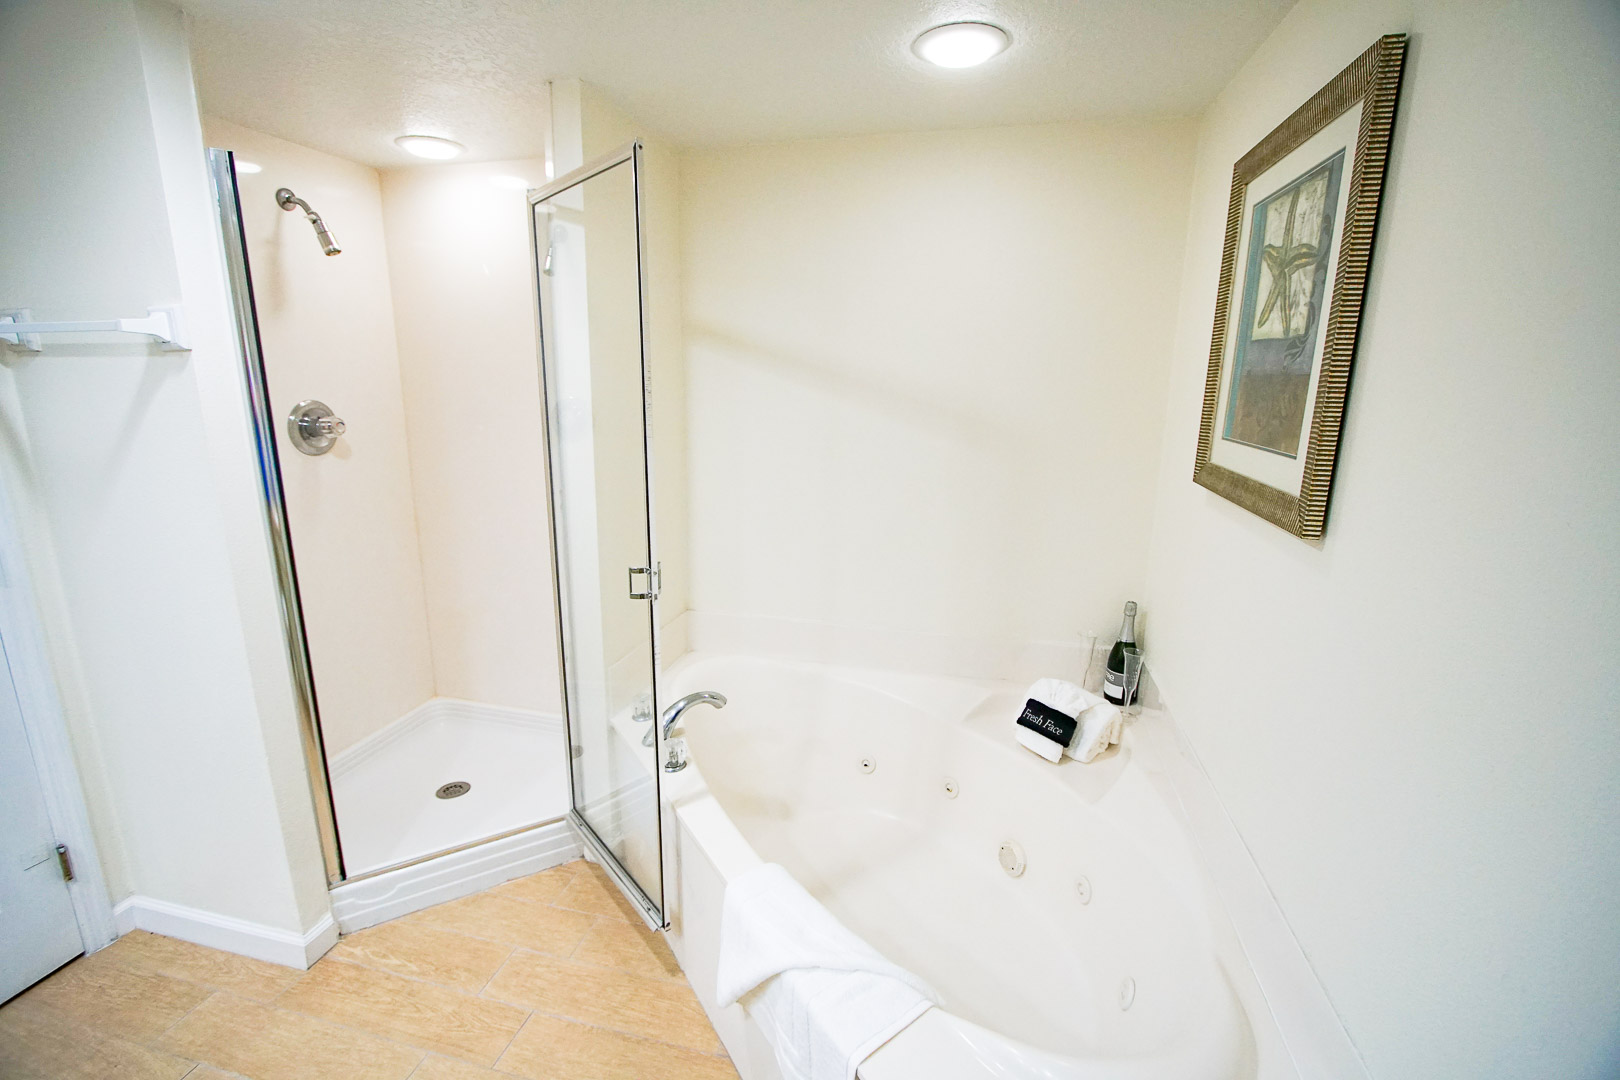 A refreshing bathroom with shower and jacuzzi tub at VRI's The Resort on Cocoa Beach in Florida.